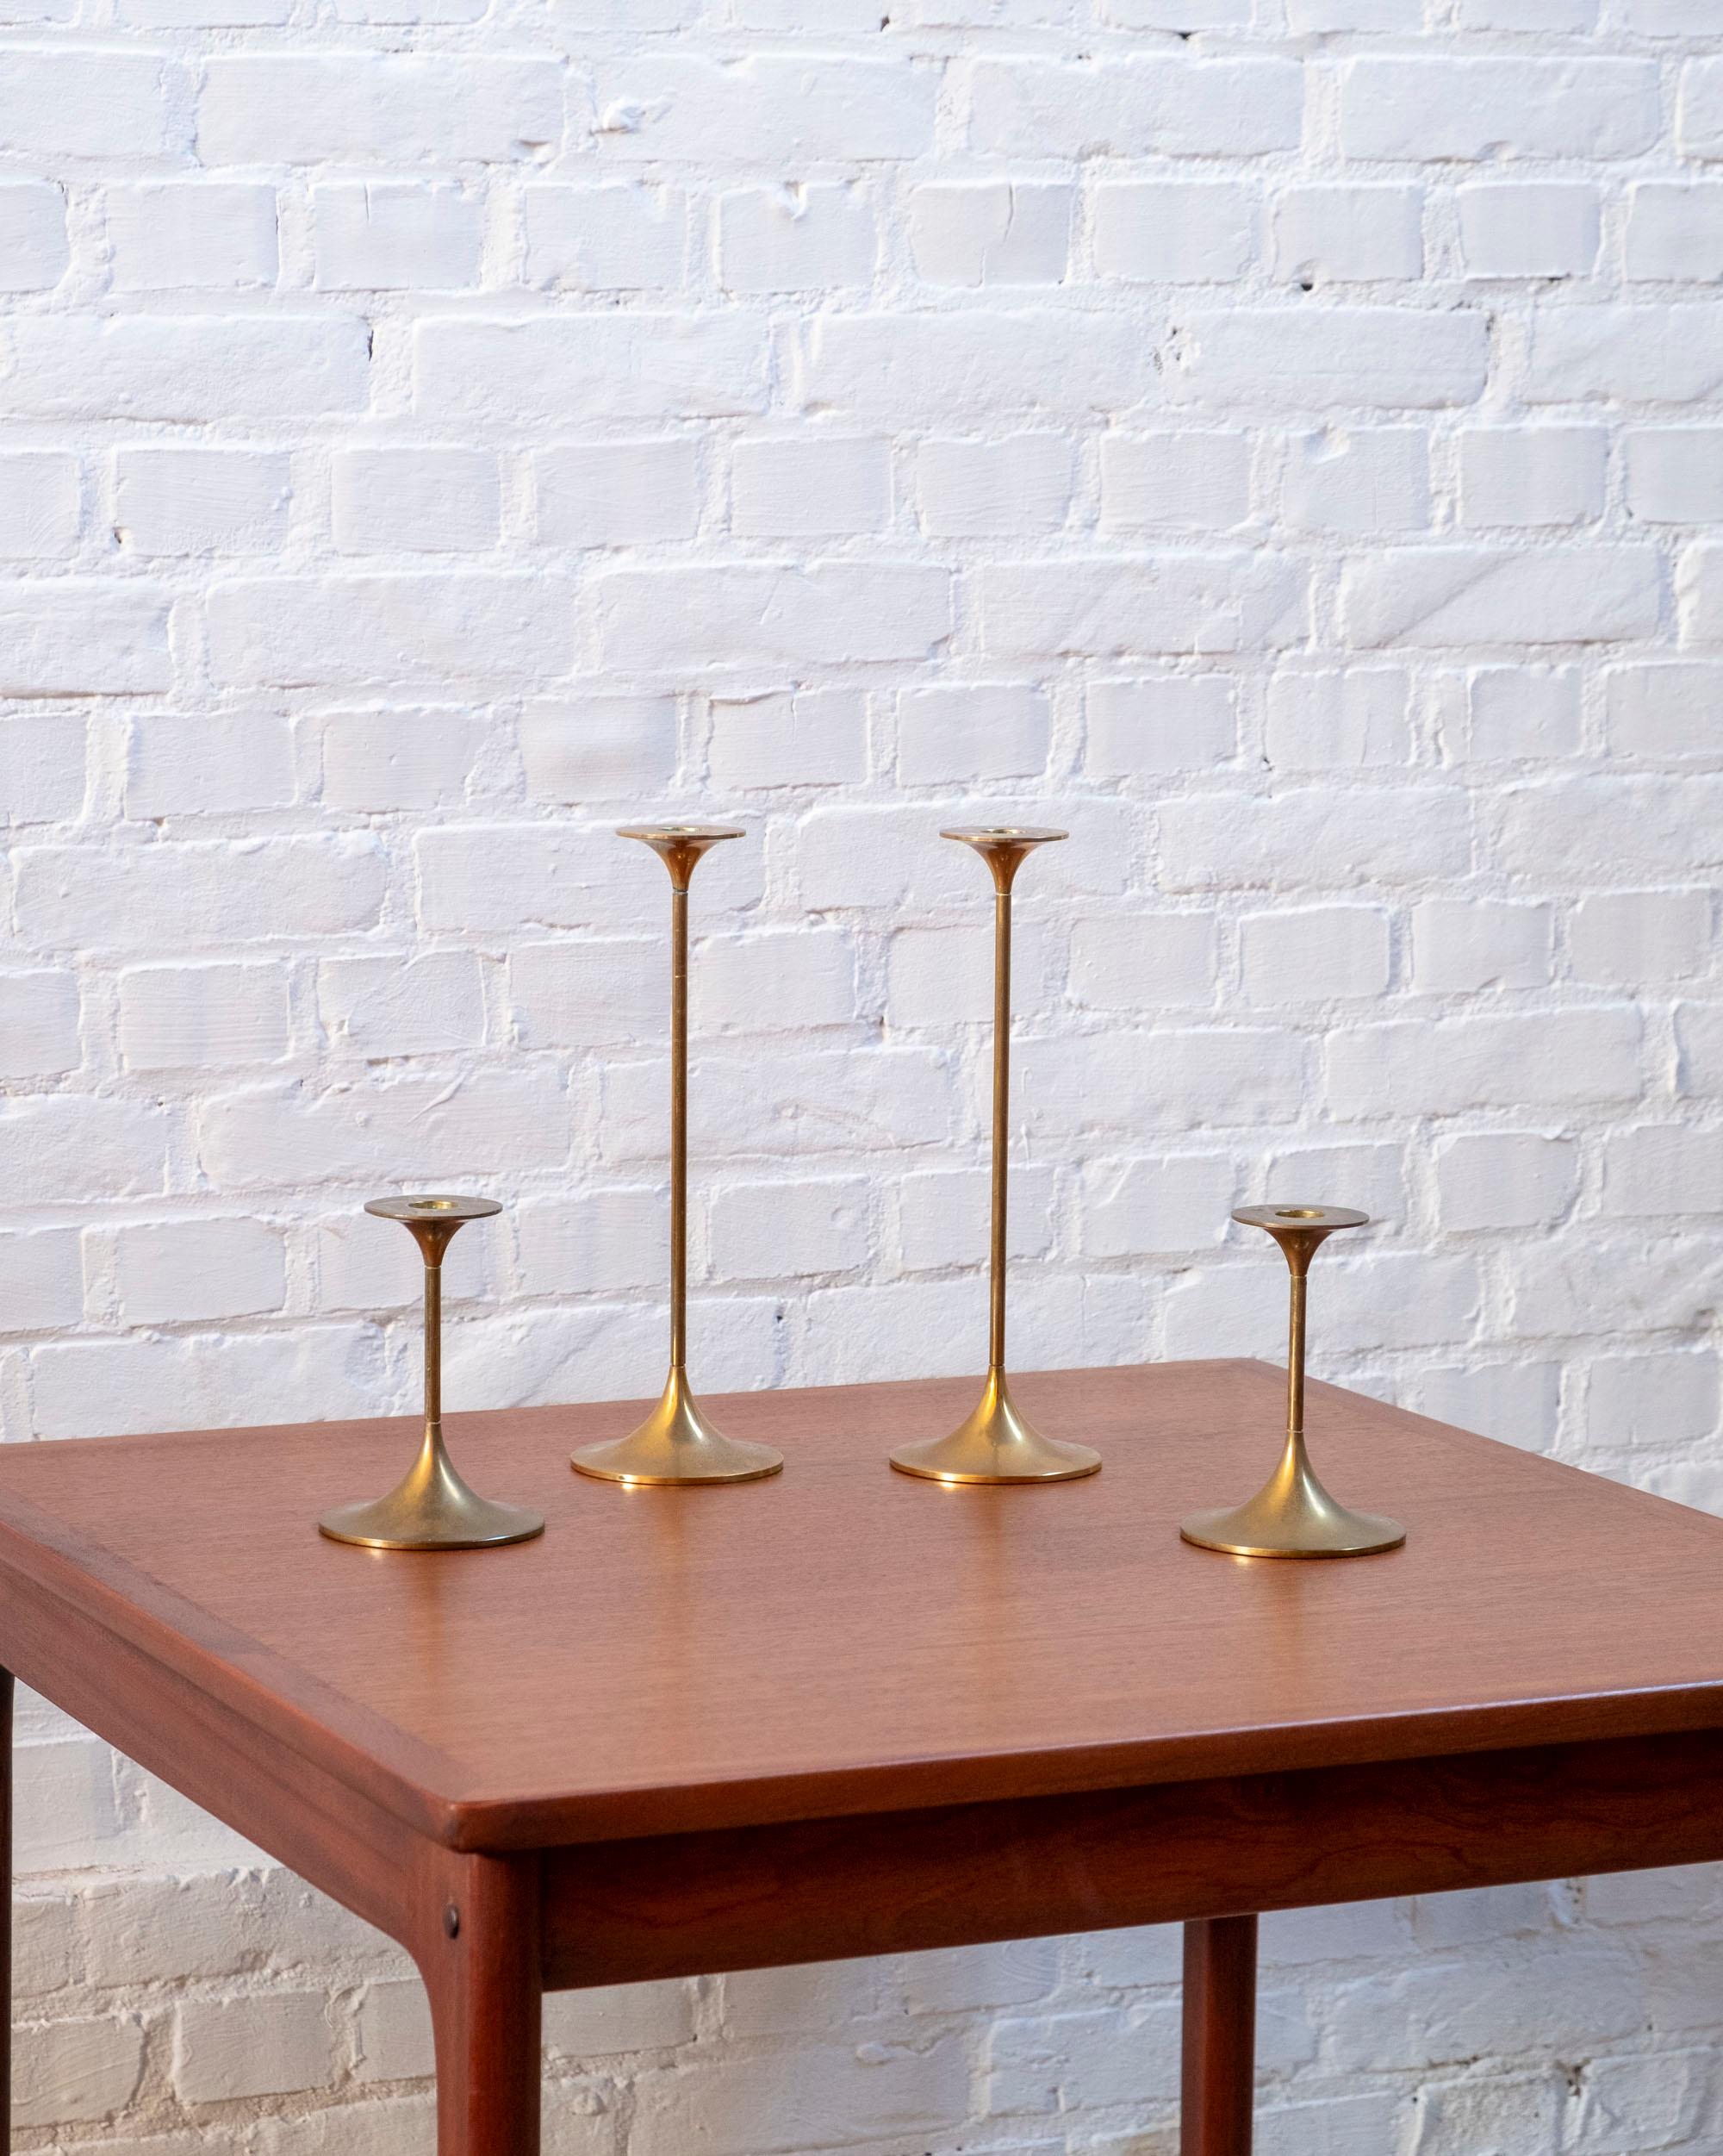 Wonderful set of 4 Mid-Century Modern brass candle holders designed by Max Brüel for Torben Ørskov.
Stamped at the base and top “TØ made in Denmark“.
Age related wear and patina in accordance with age.

Measurements: Two candleholders with a height